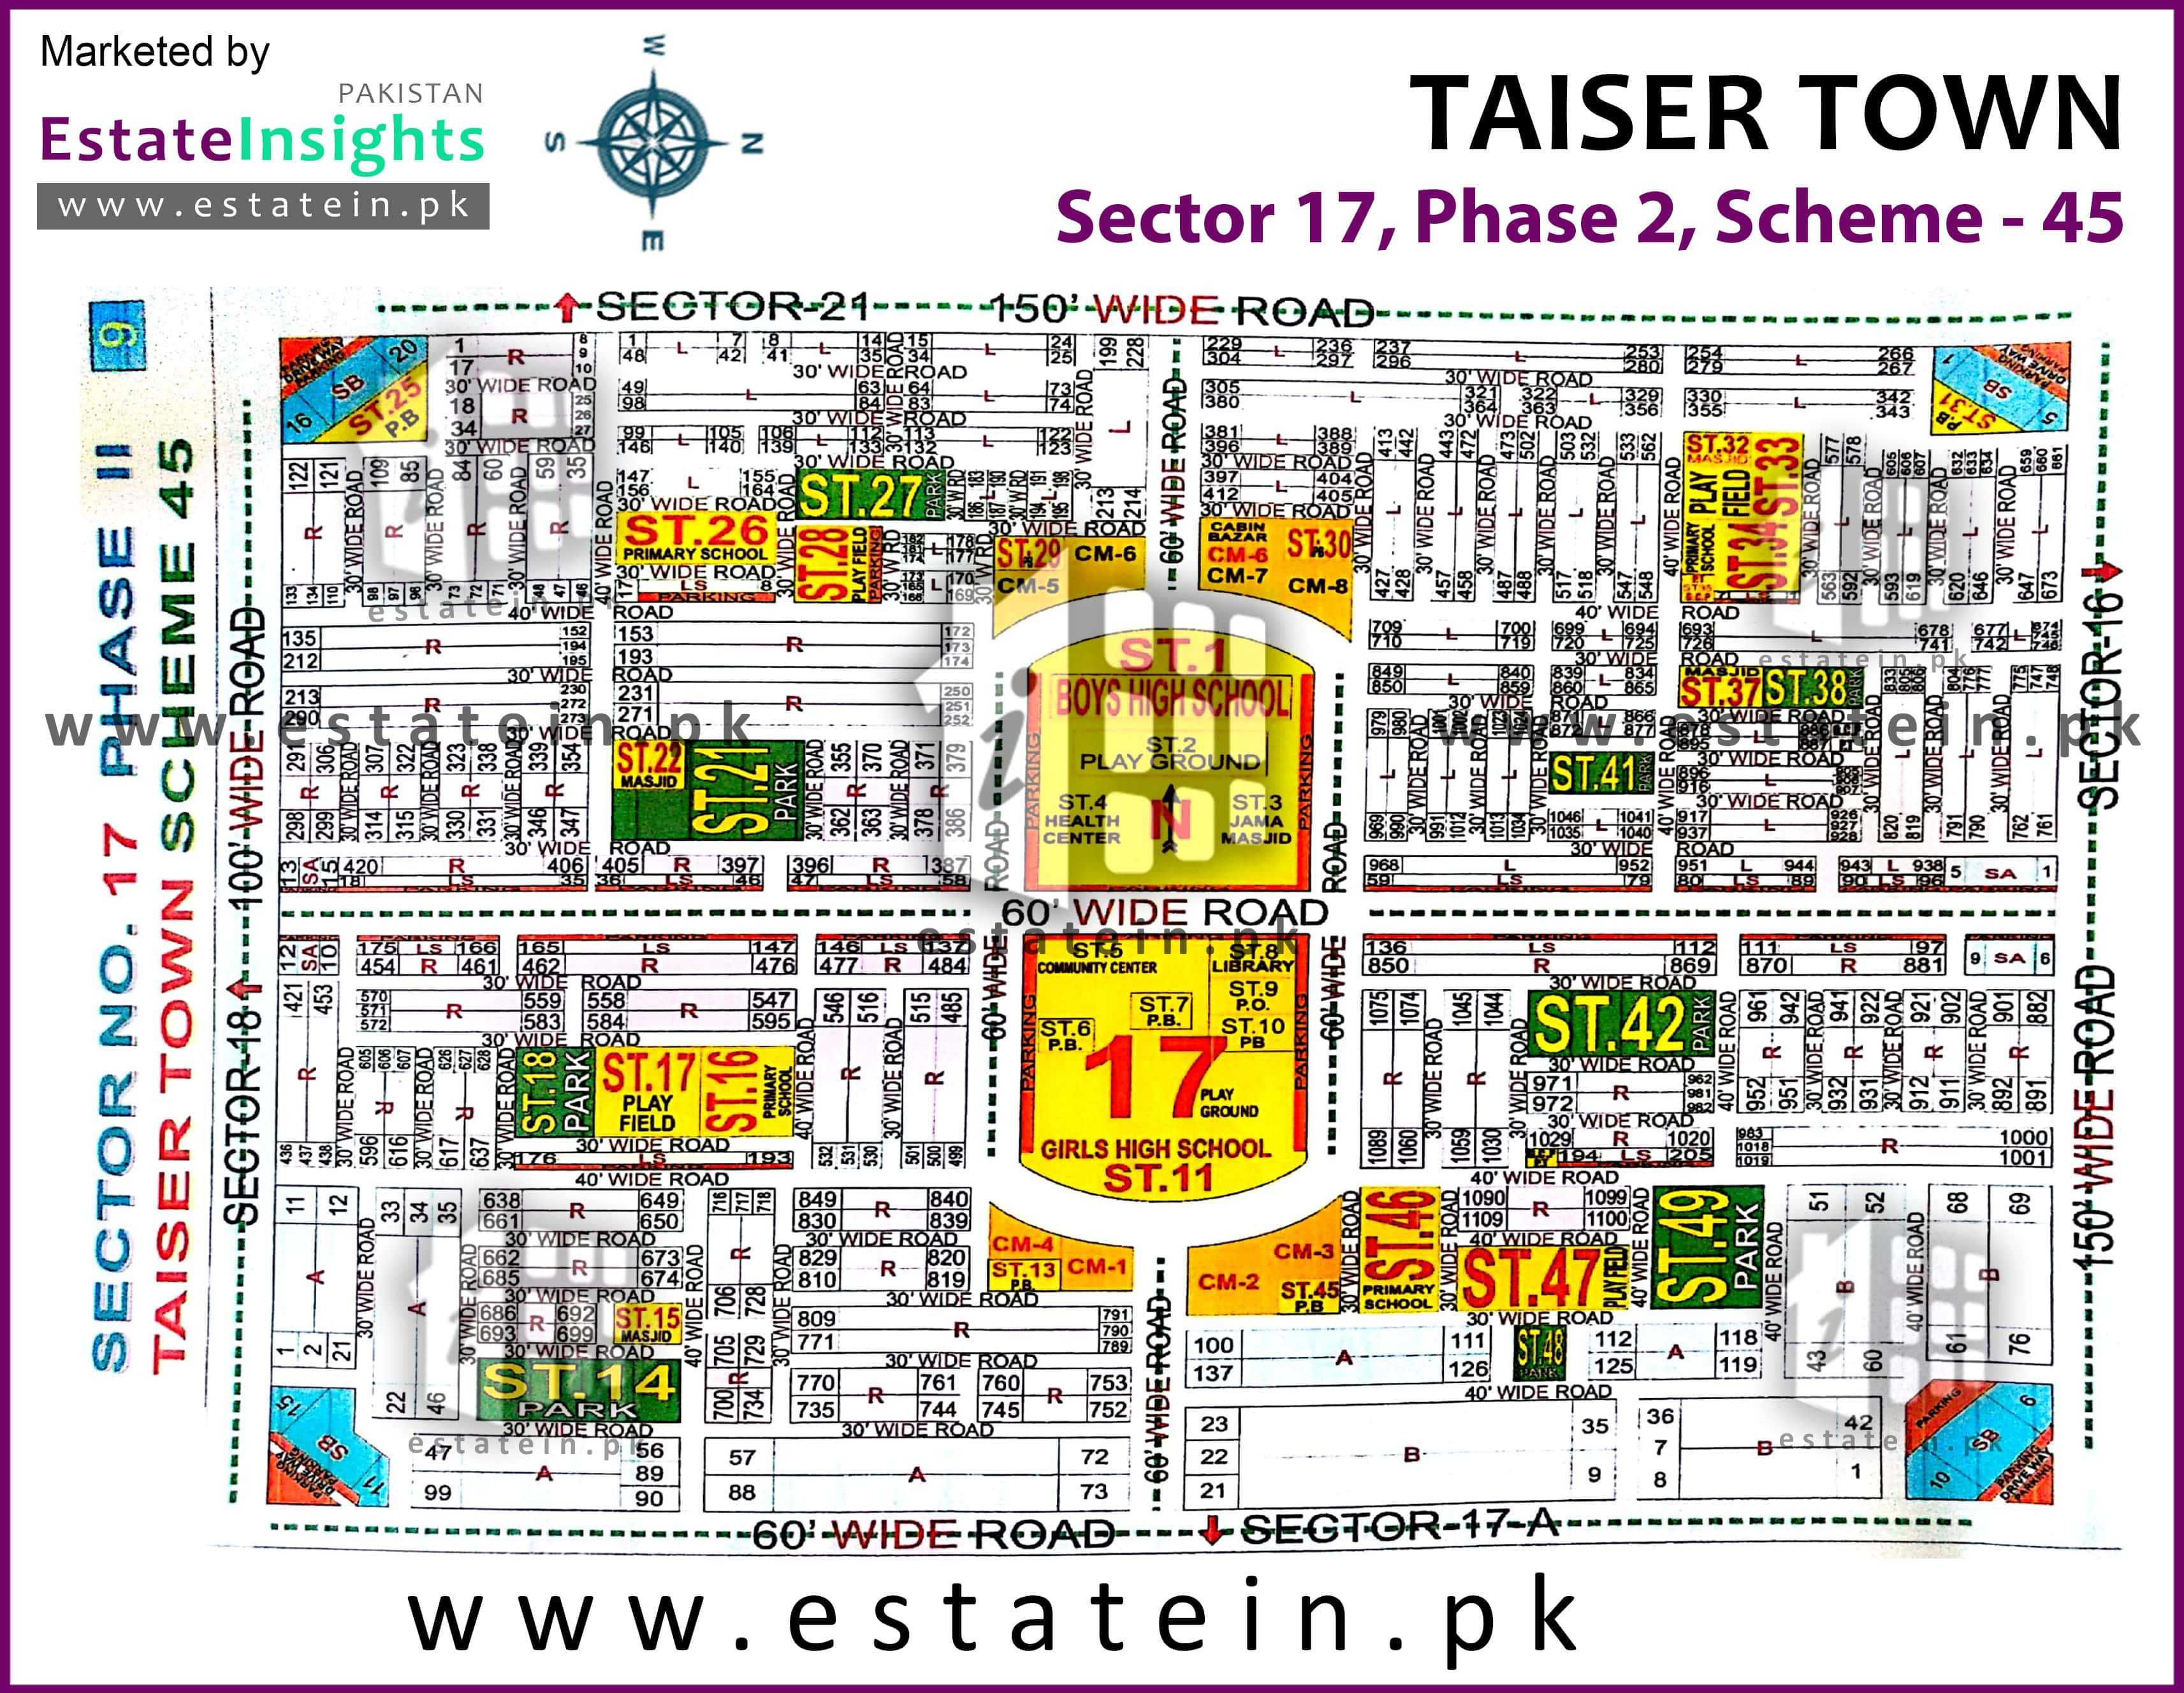 Site Plan of Sector 17 of Taiser Town Phase II